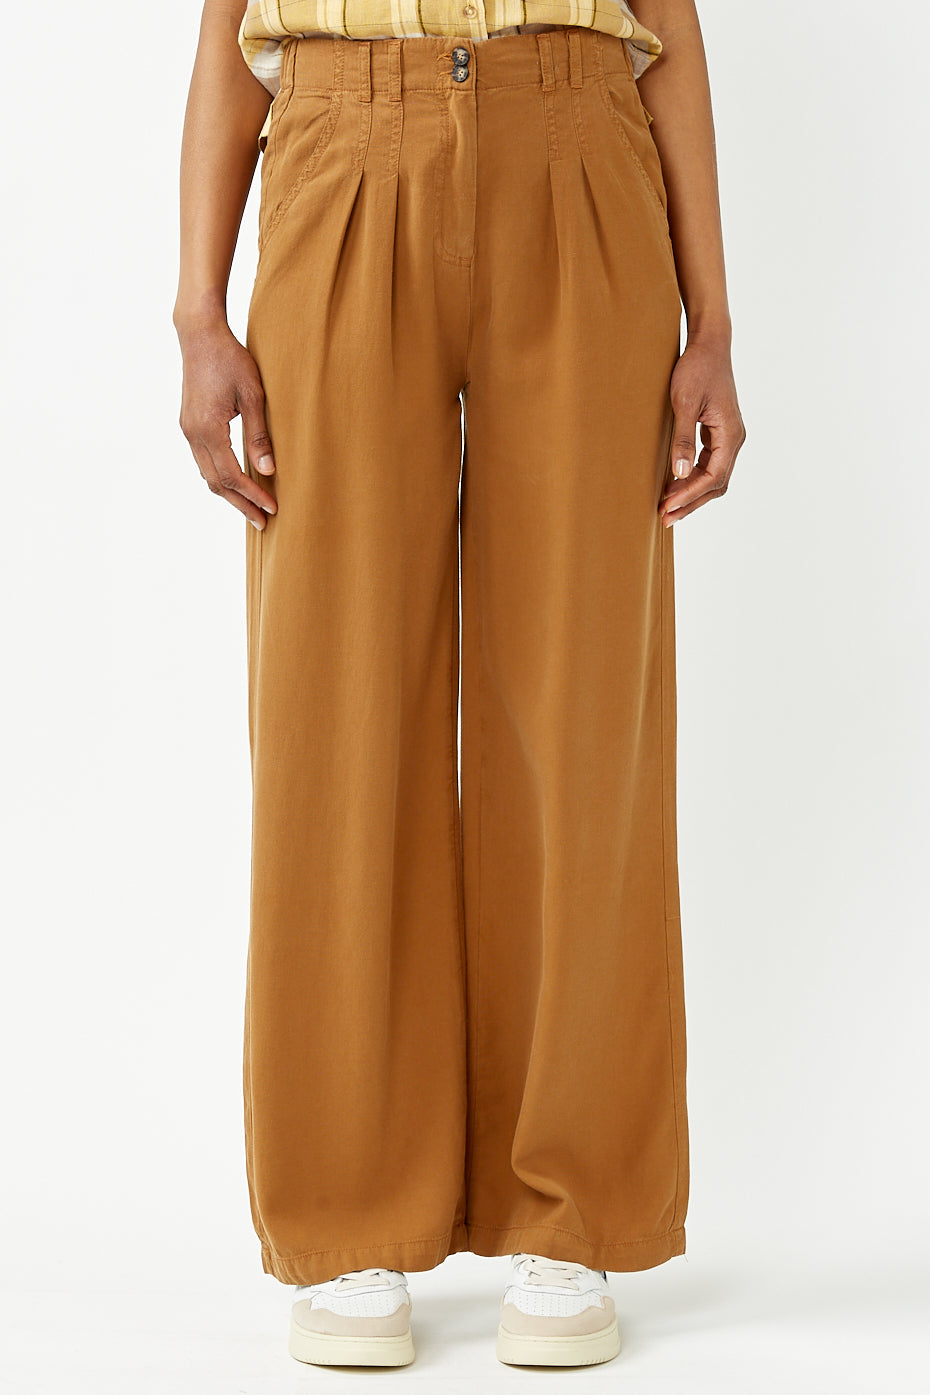 Indi & Cold Cuero Lyocell Trousers